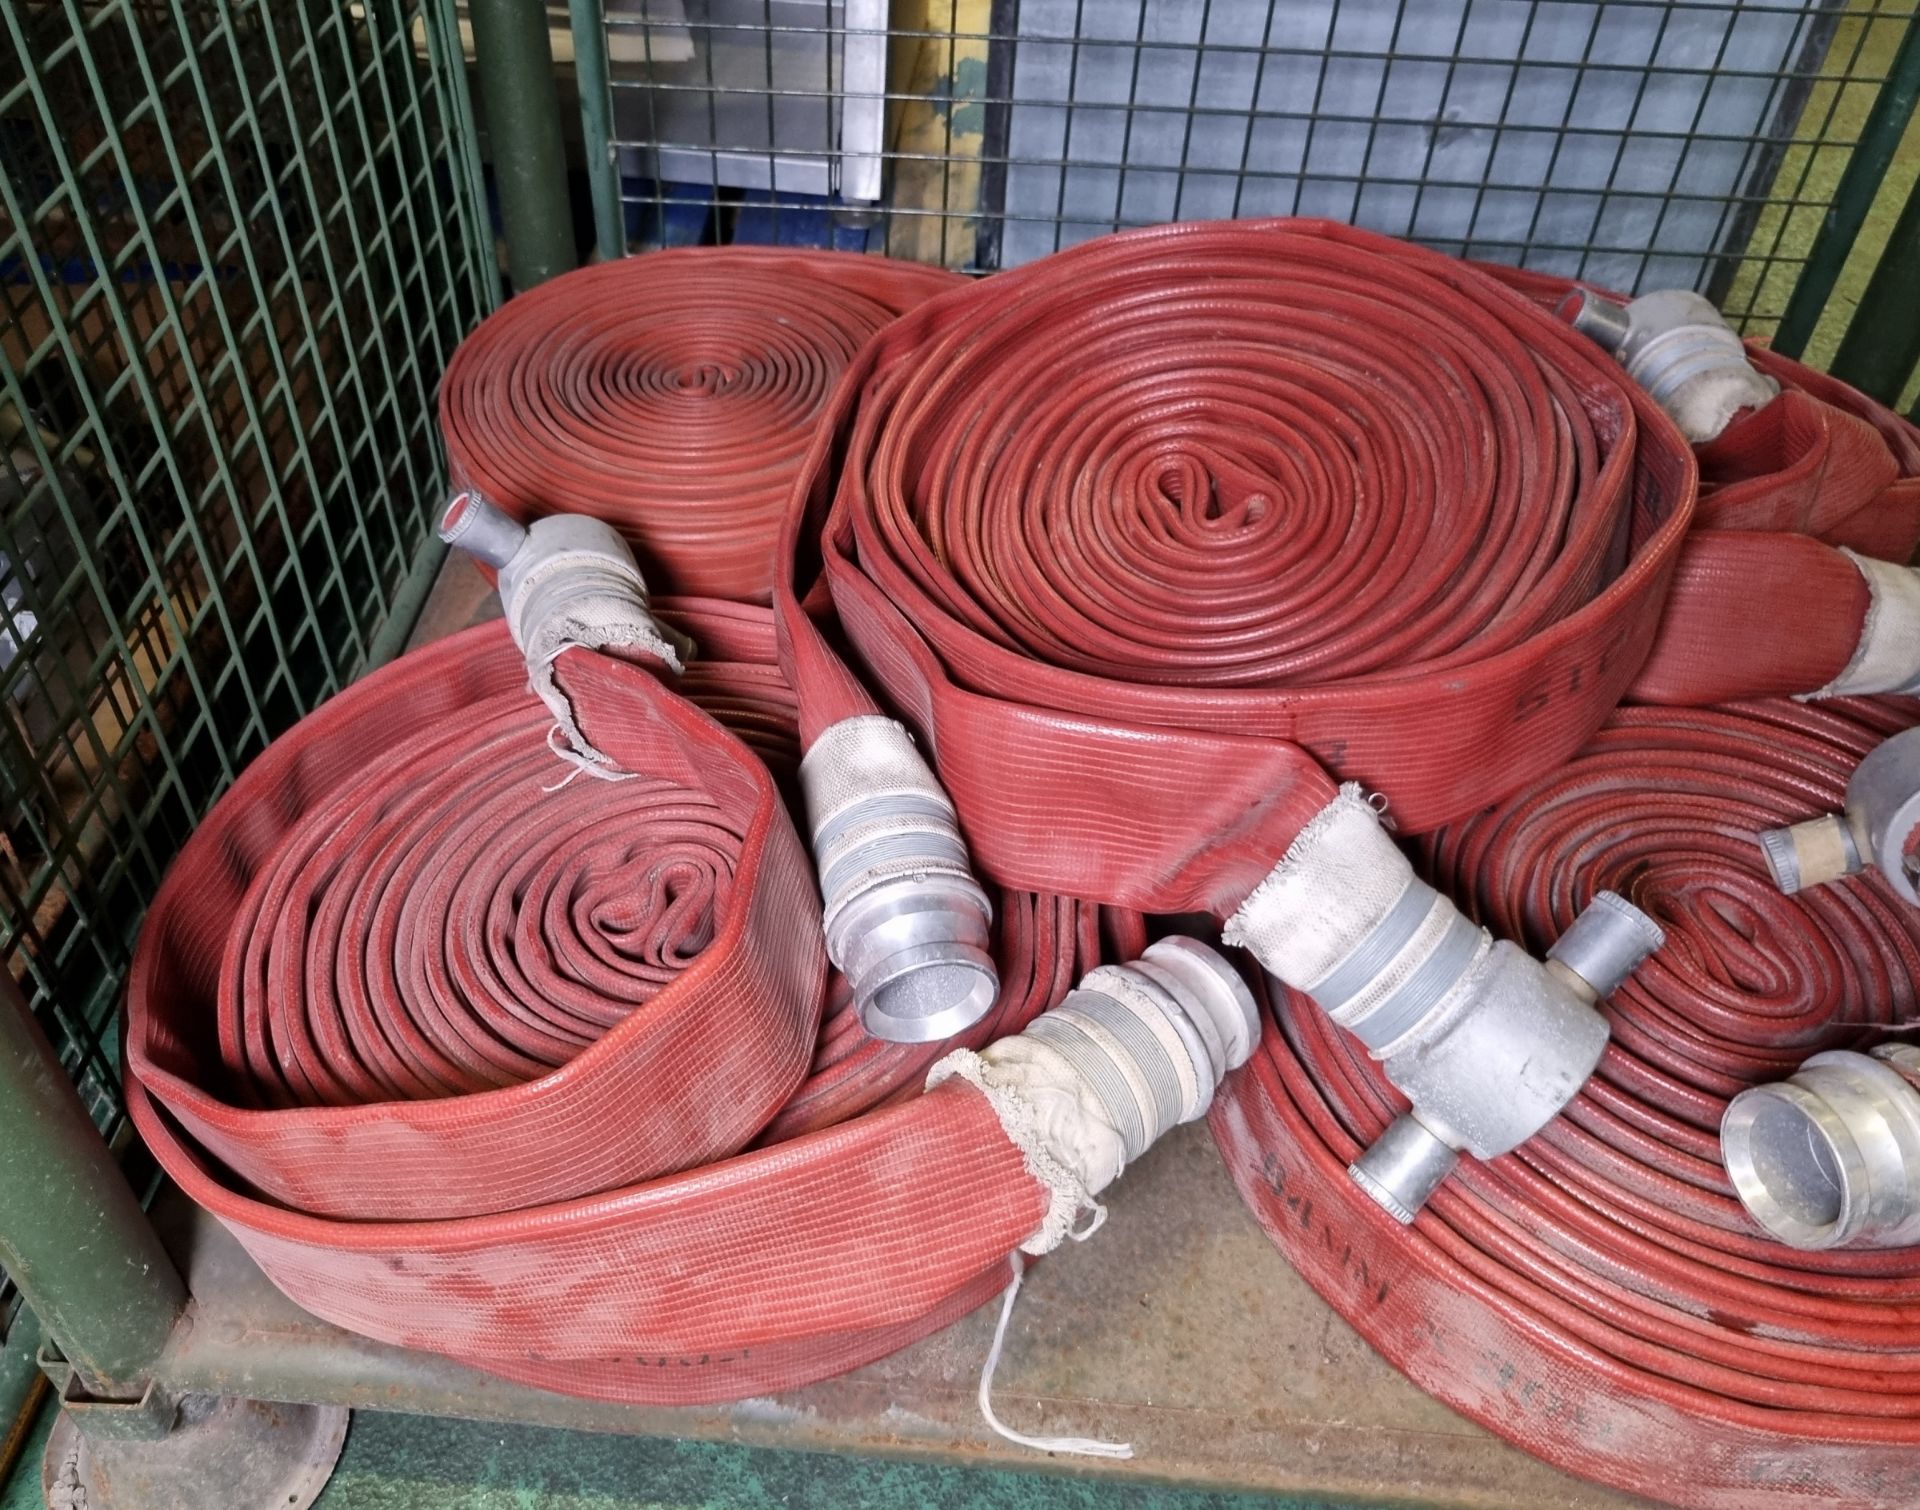 5x Red 45mm layflat hose with couplings approx length 20m - Image 4 of 4